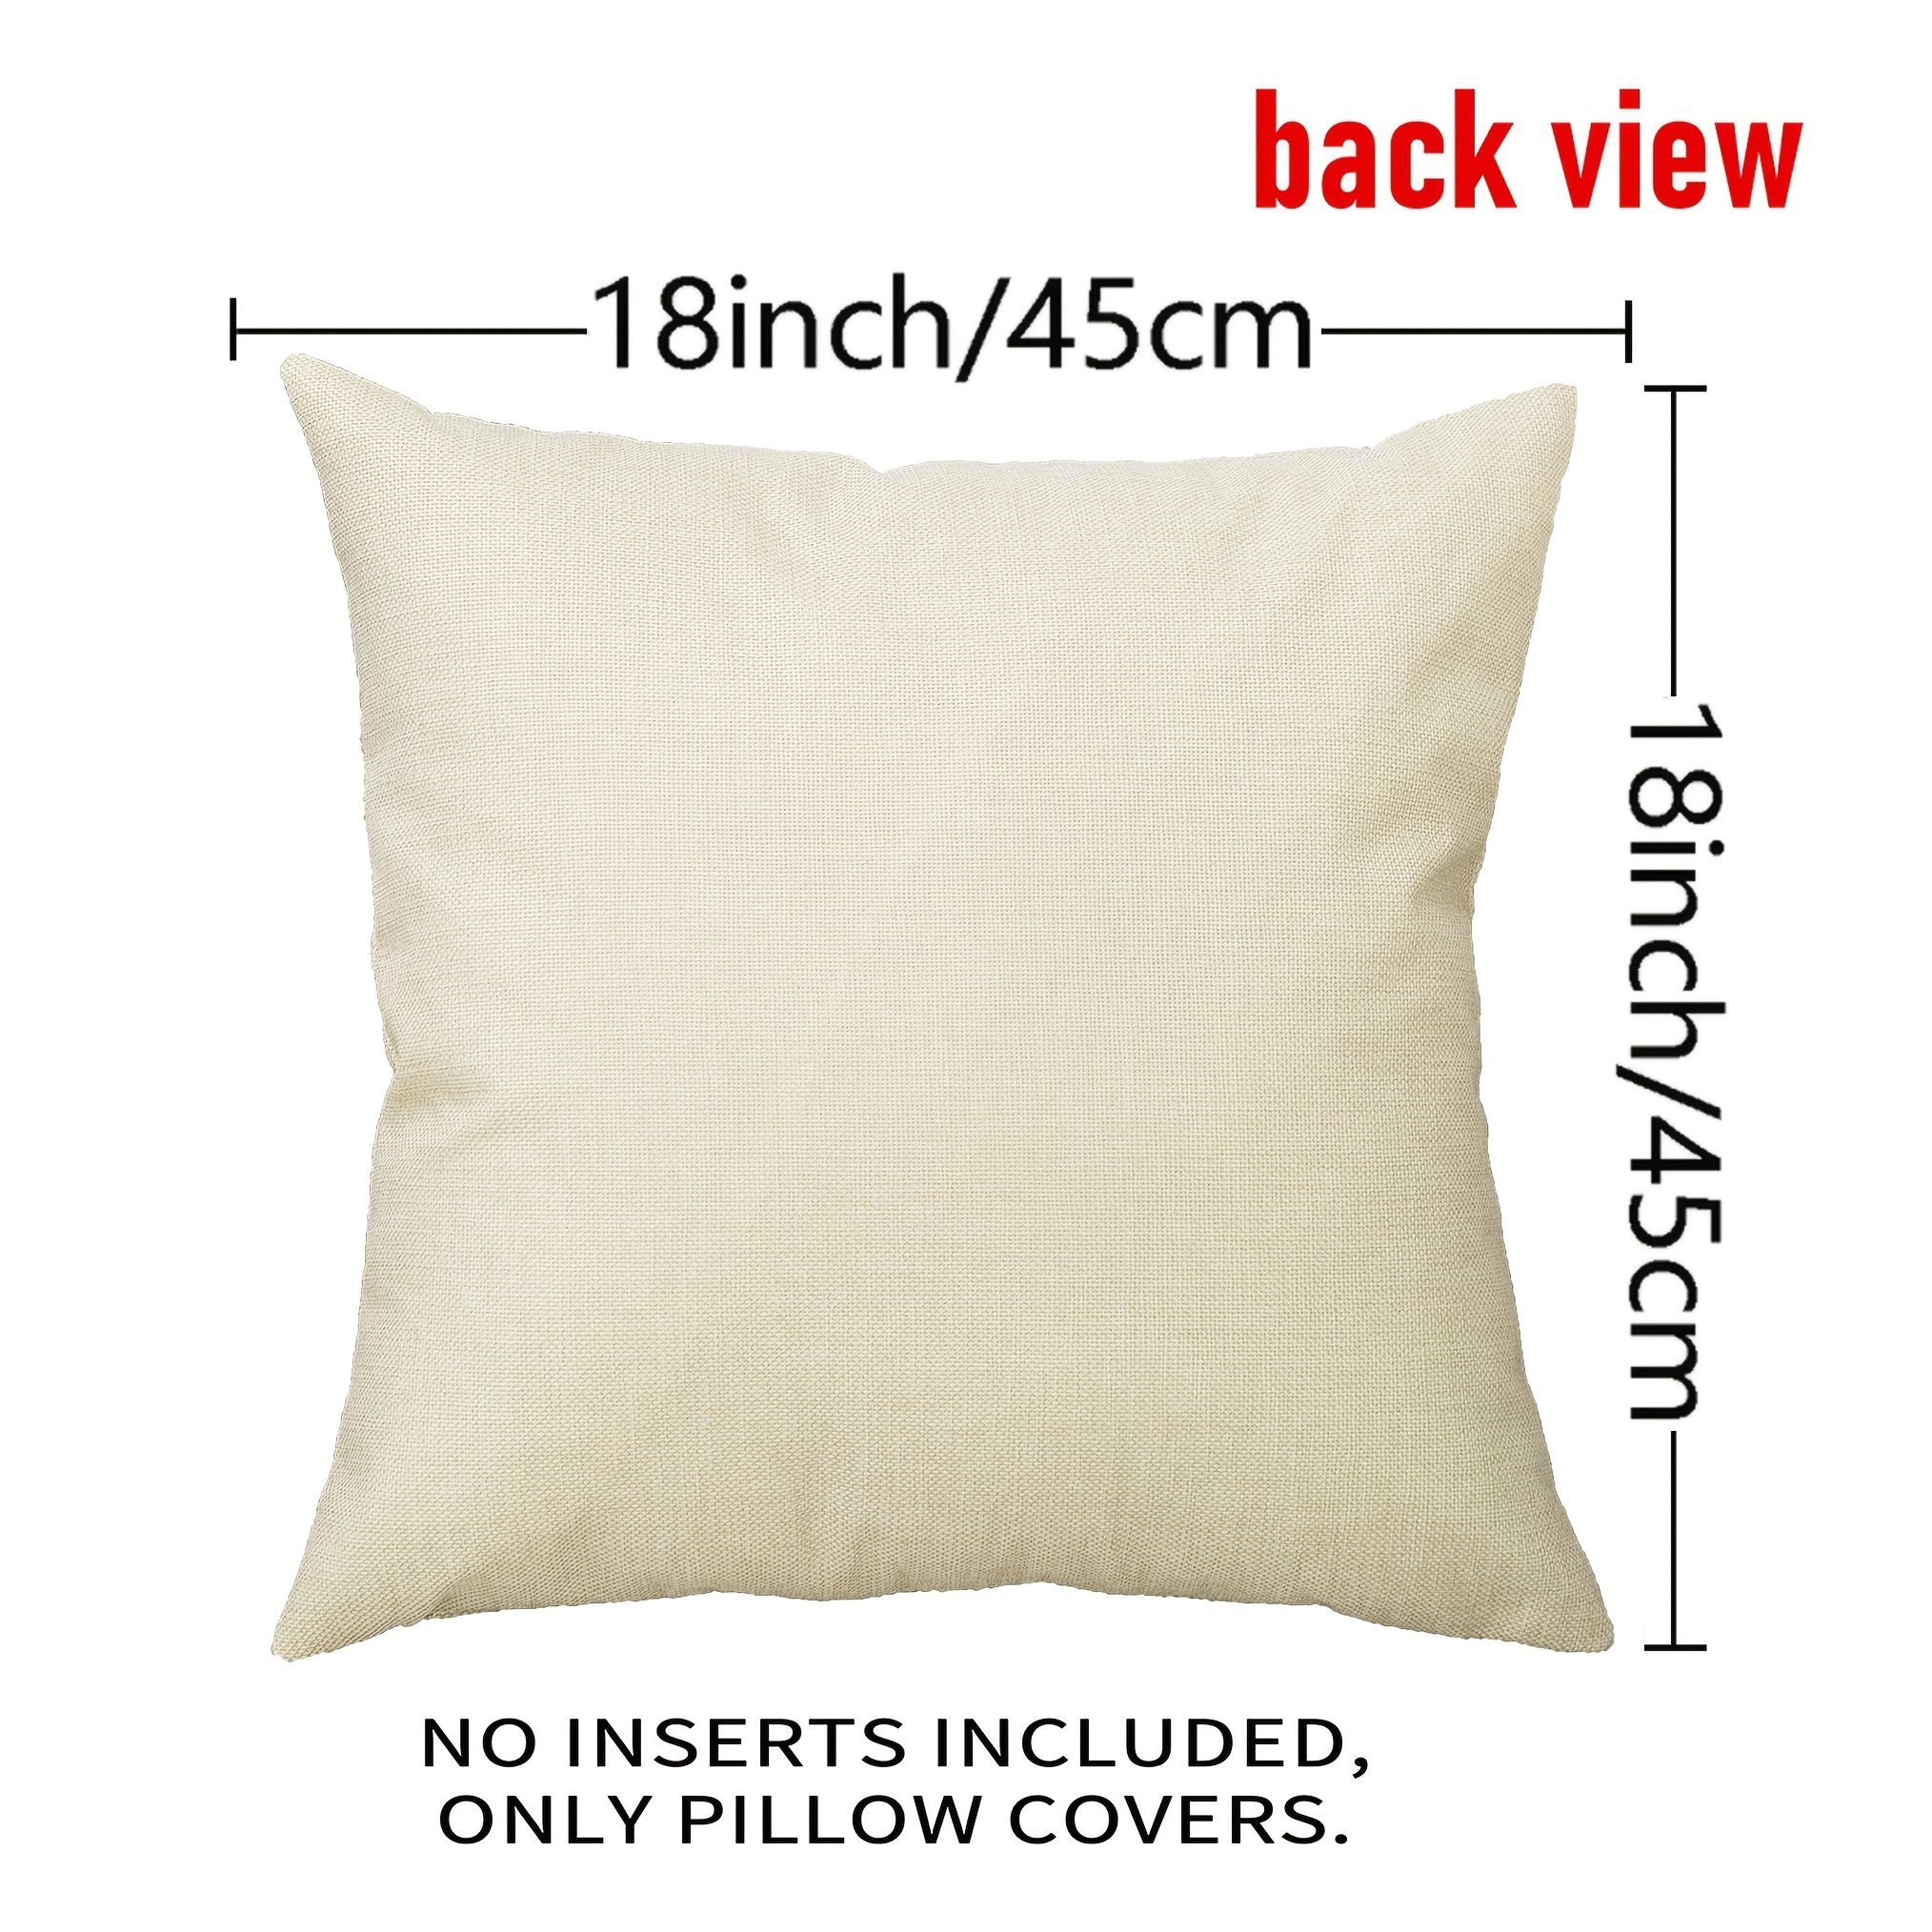 5 Pack Sublimation Pillow Cases 18x18, Blank Linen Pillow Covers